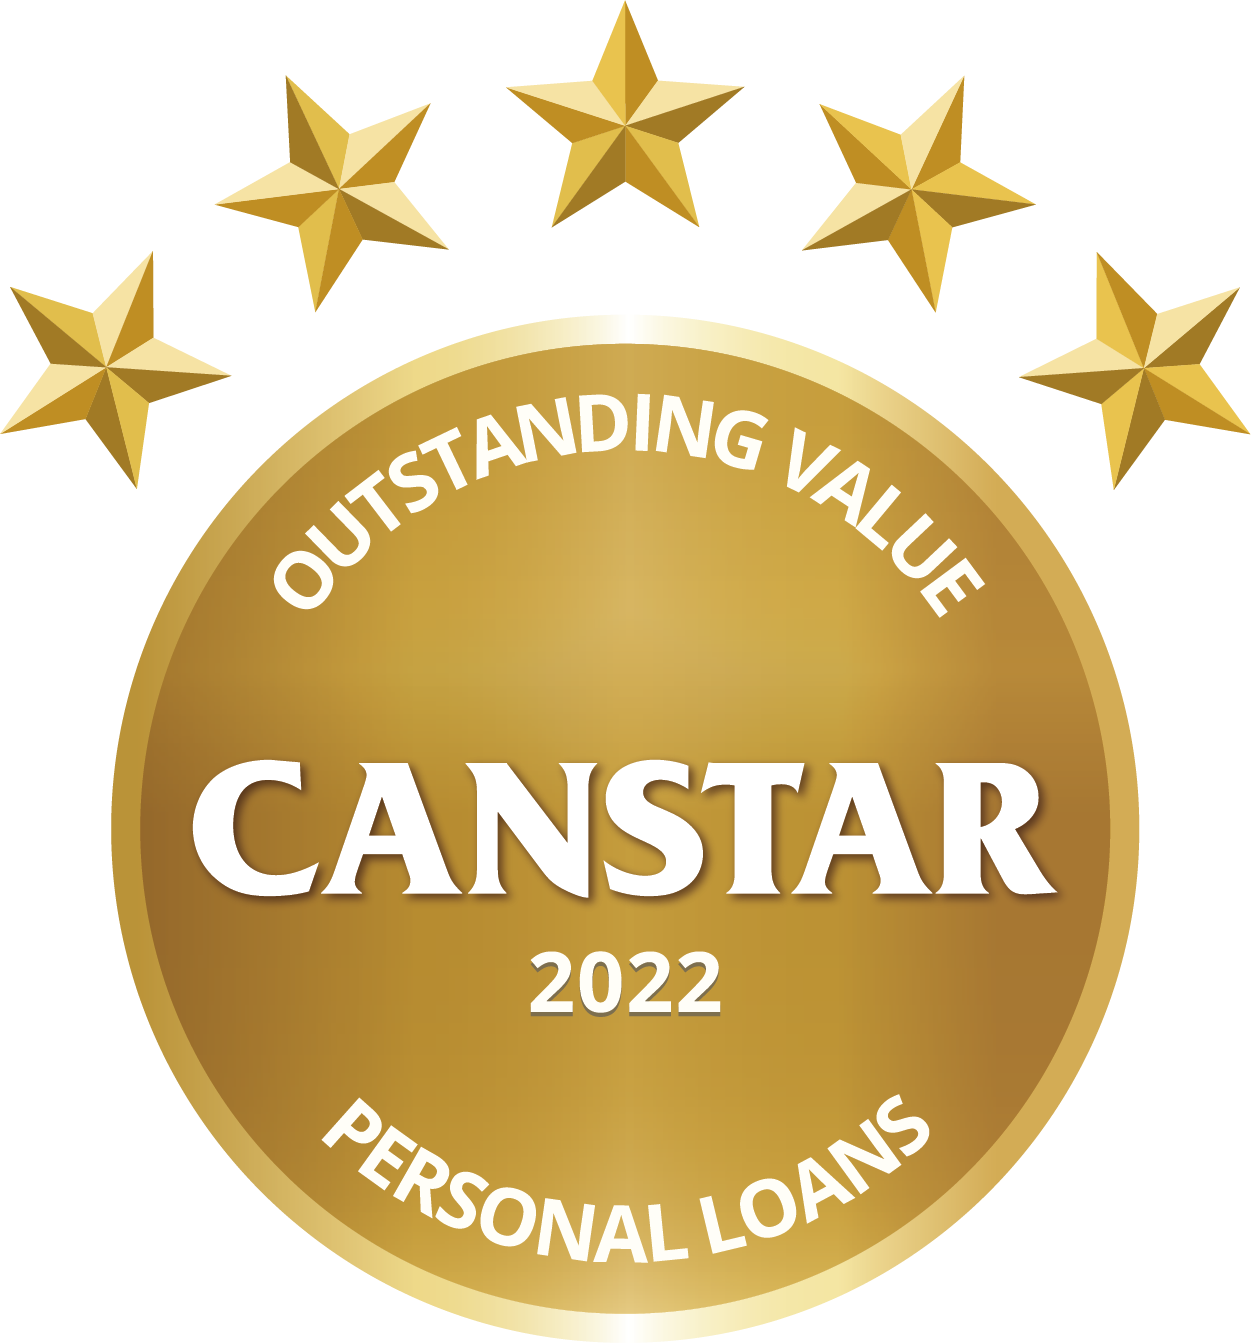 Canstar outstanding value